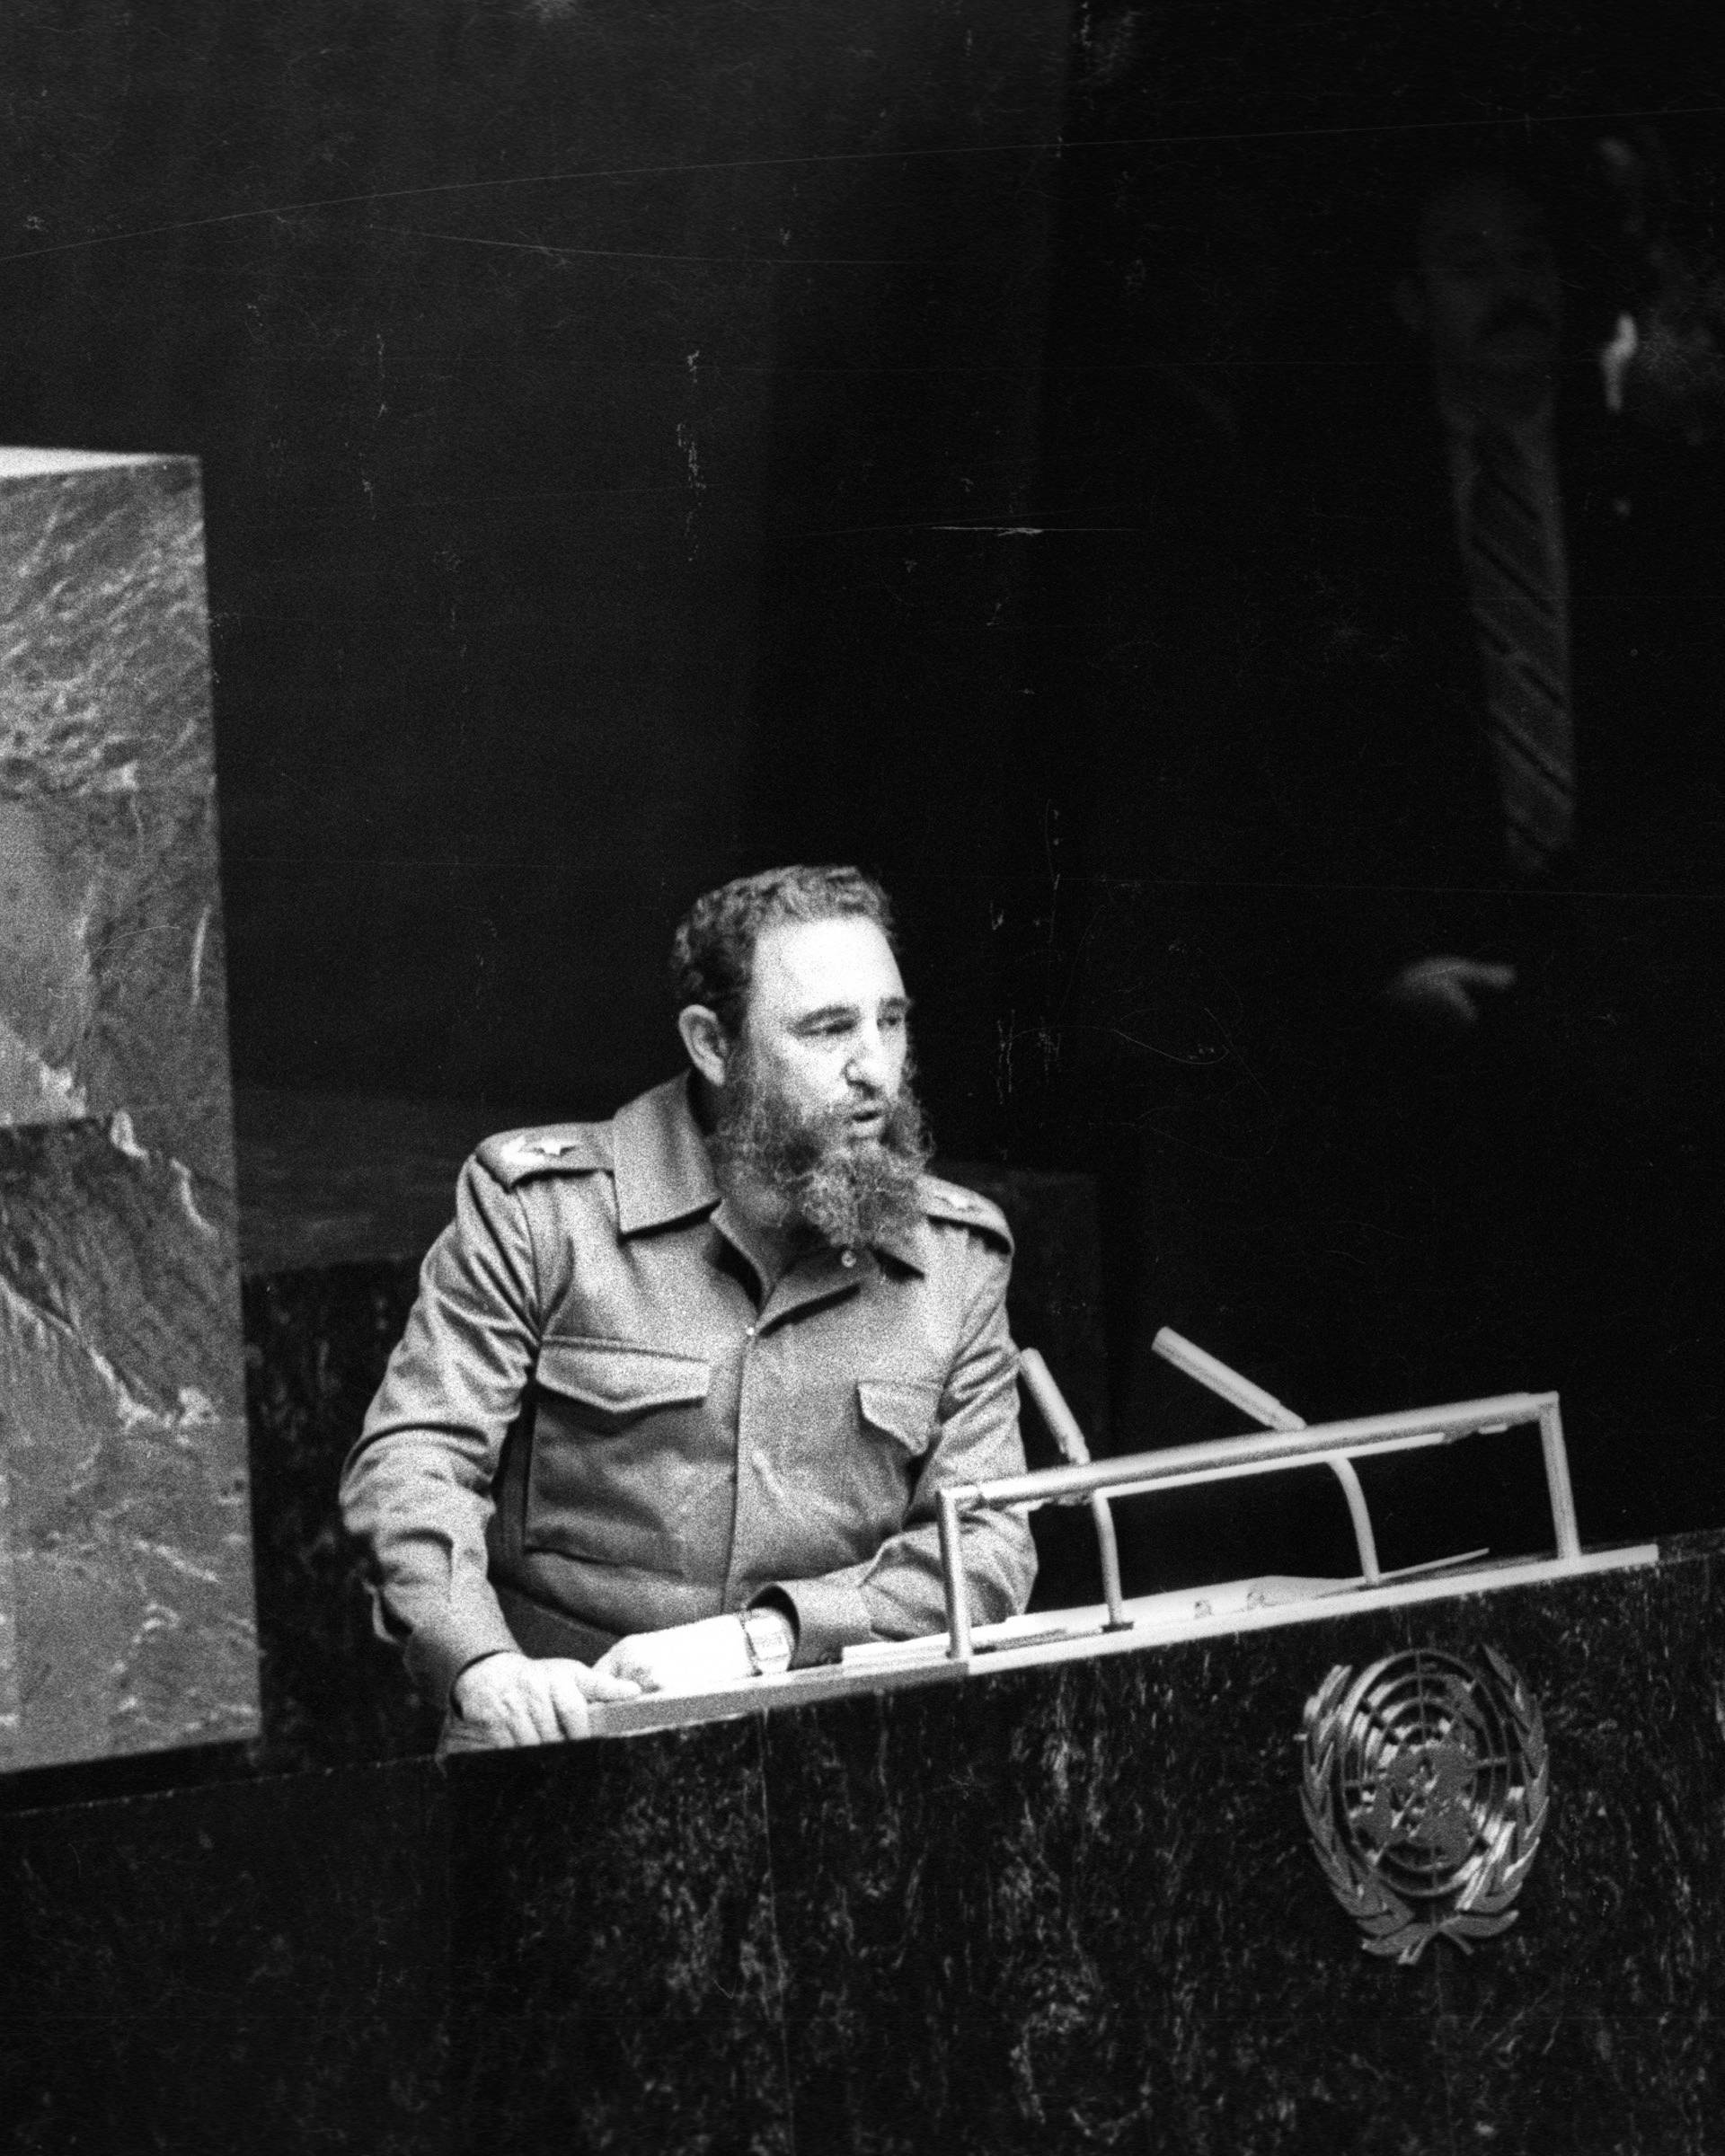 File photo of then Cuban President Fidel Castro addressing the audience as president of the Non-Aligned Movement at the United Nations in New York